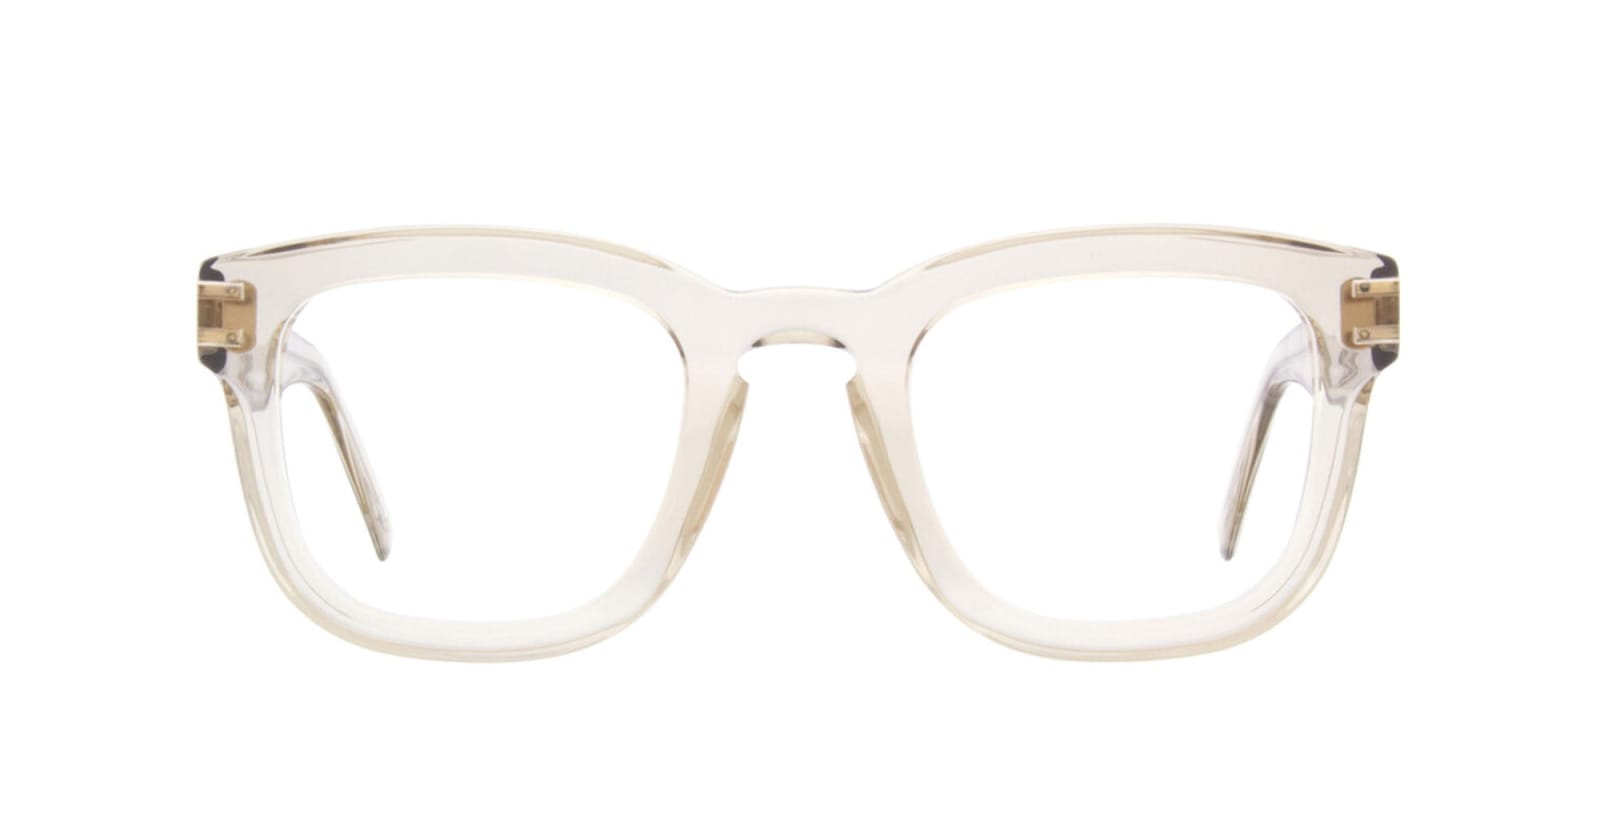 Andy Wolf Aw01 - Beige / Gold Glasses